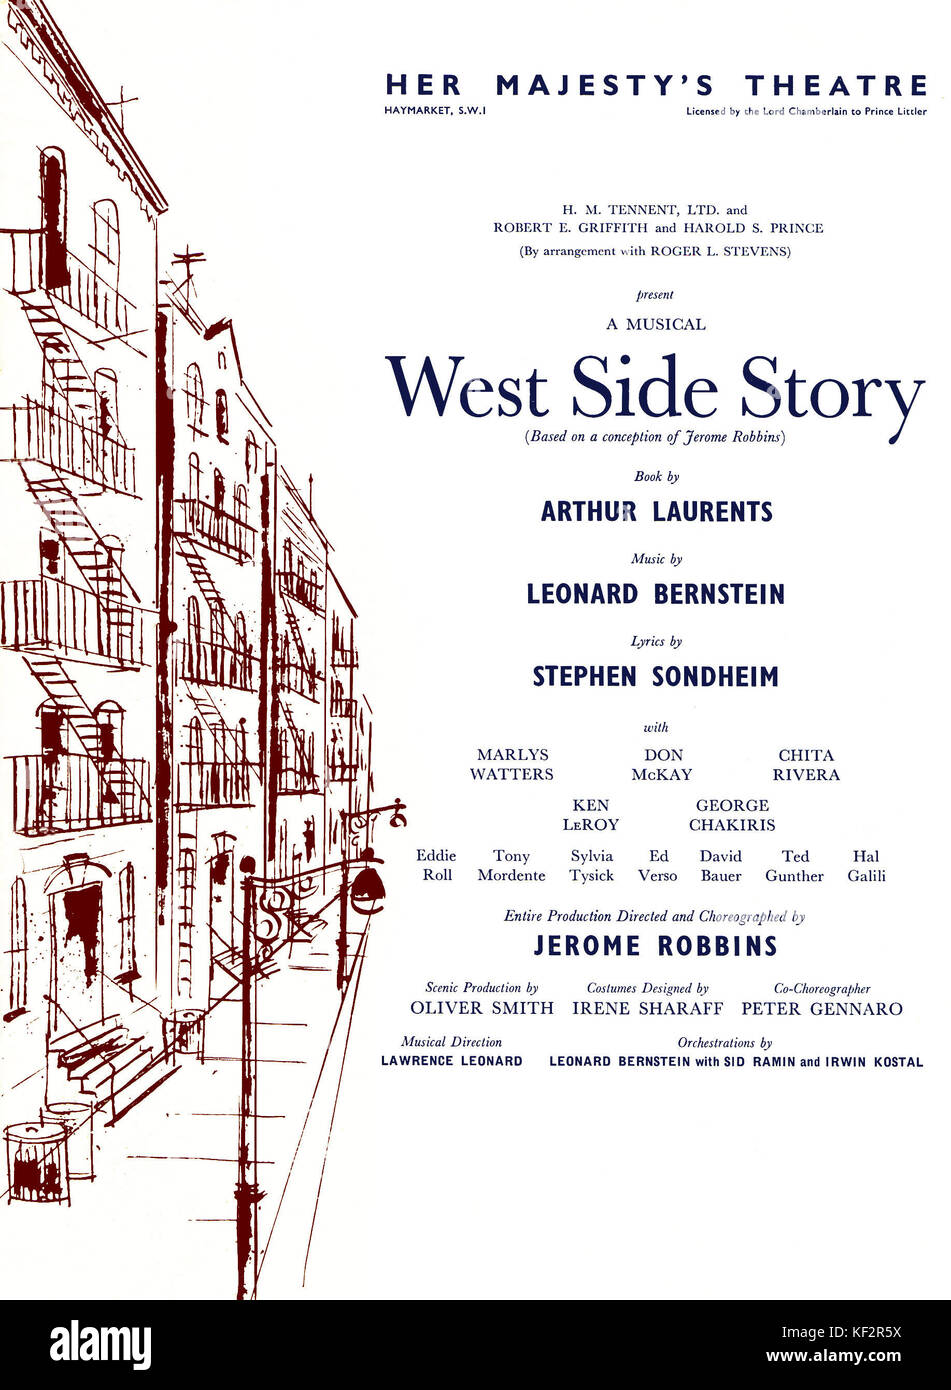 Leonard BERNSTEIN's  West Side Story Front cover of programme from Her Majesty's Theatre, Haymarket, London. Directed and choreographed by Jerome Robbins. Stock Photo